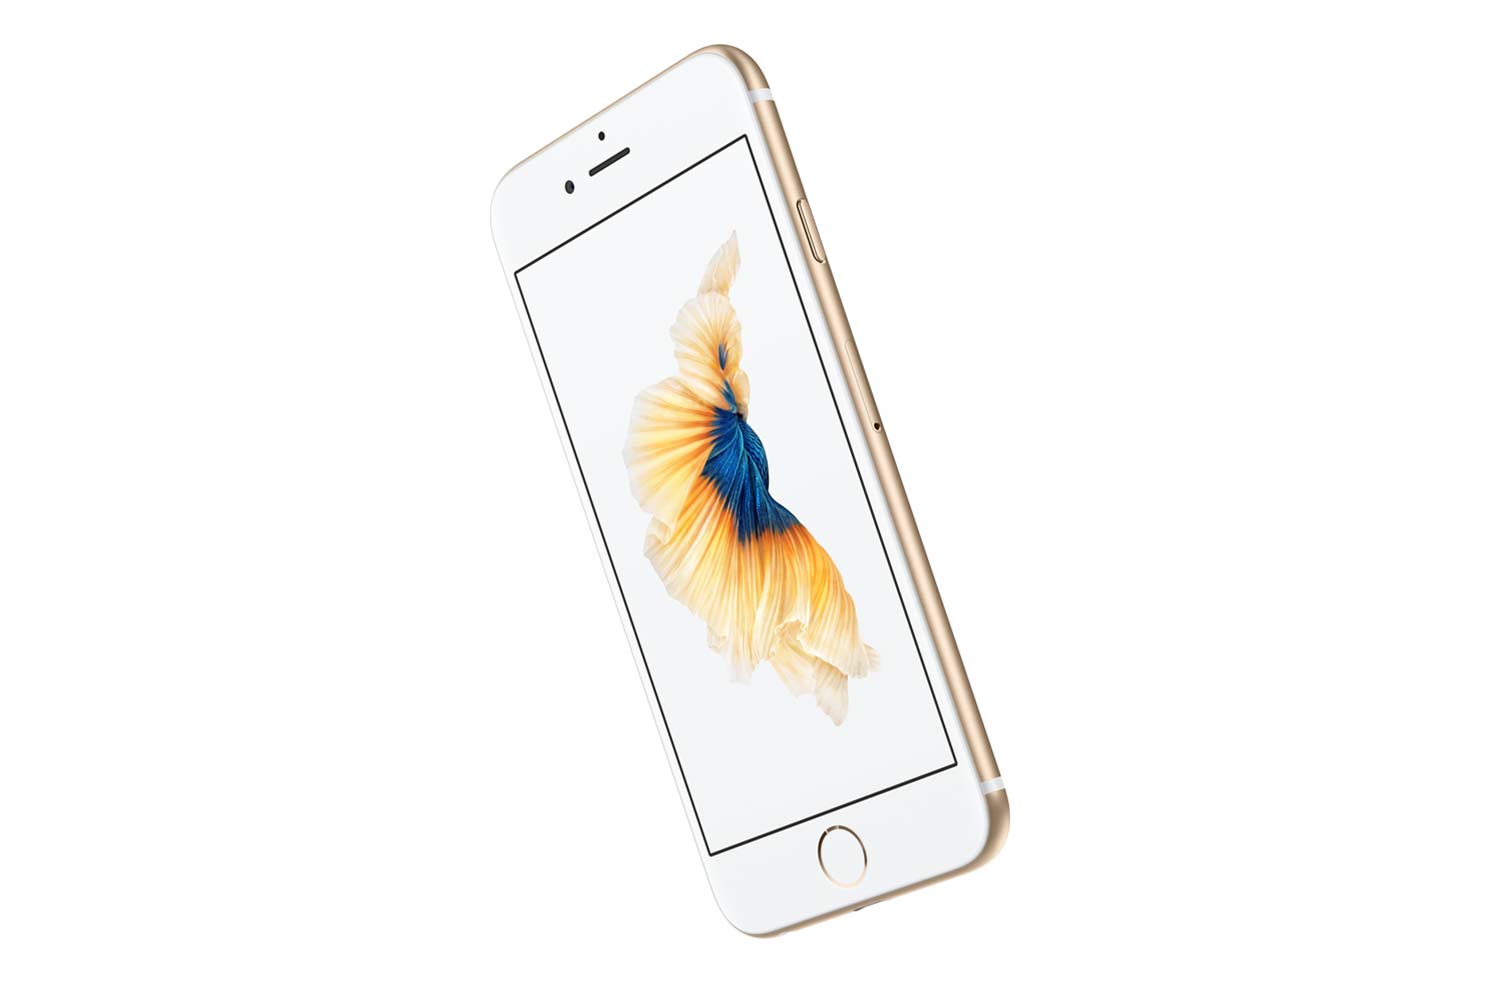 iphone 6s news design front large